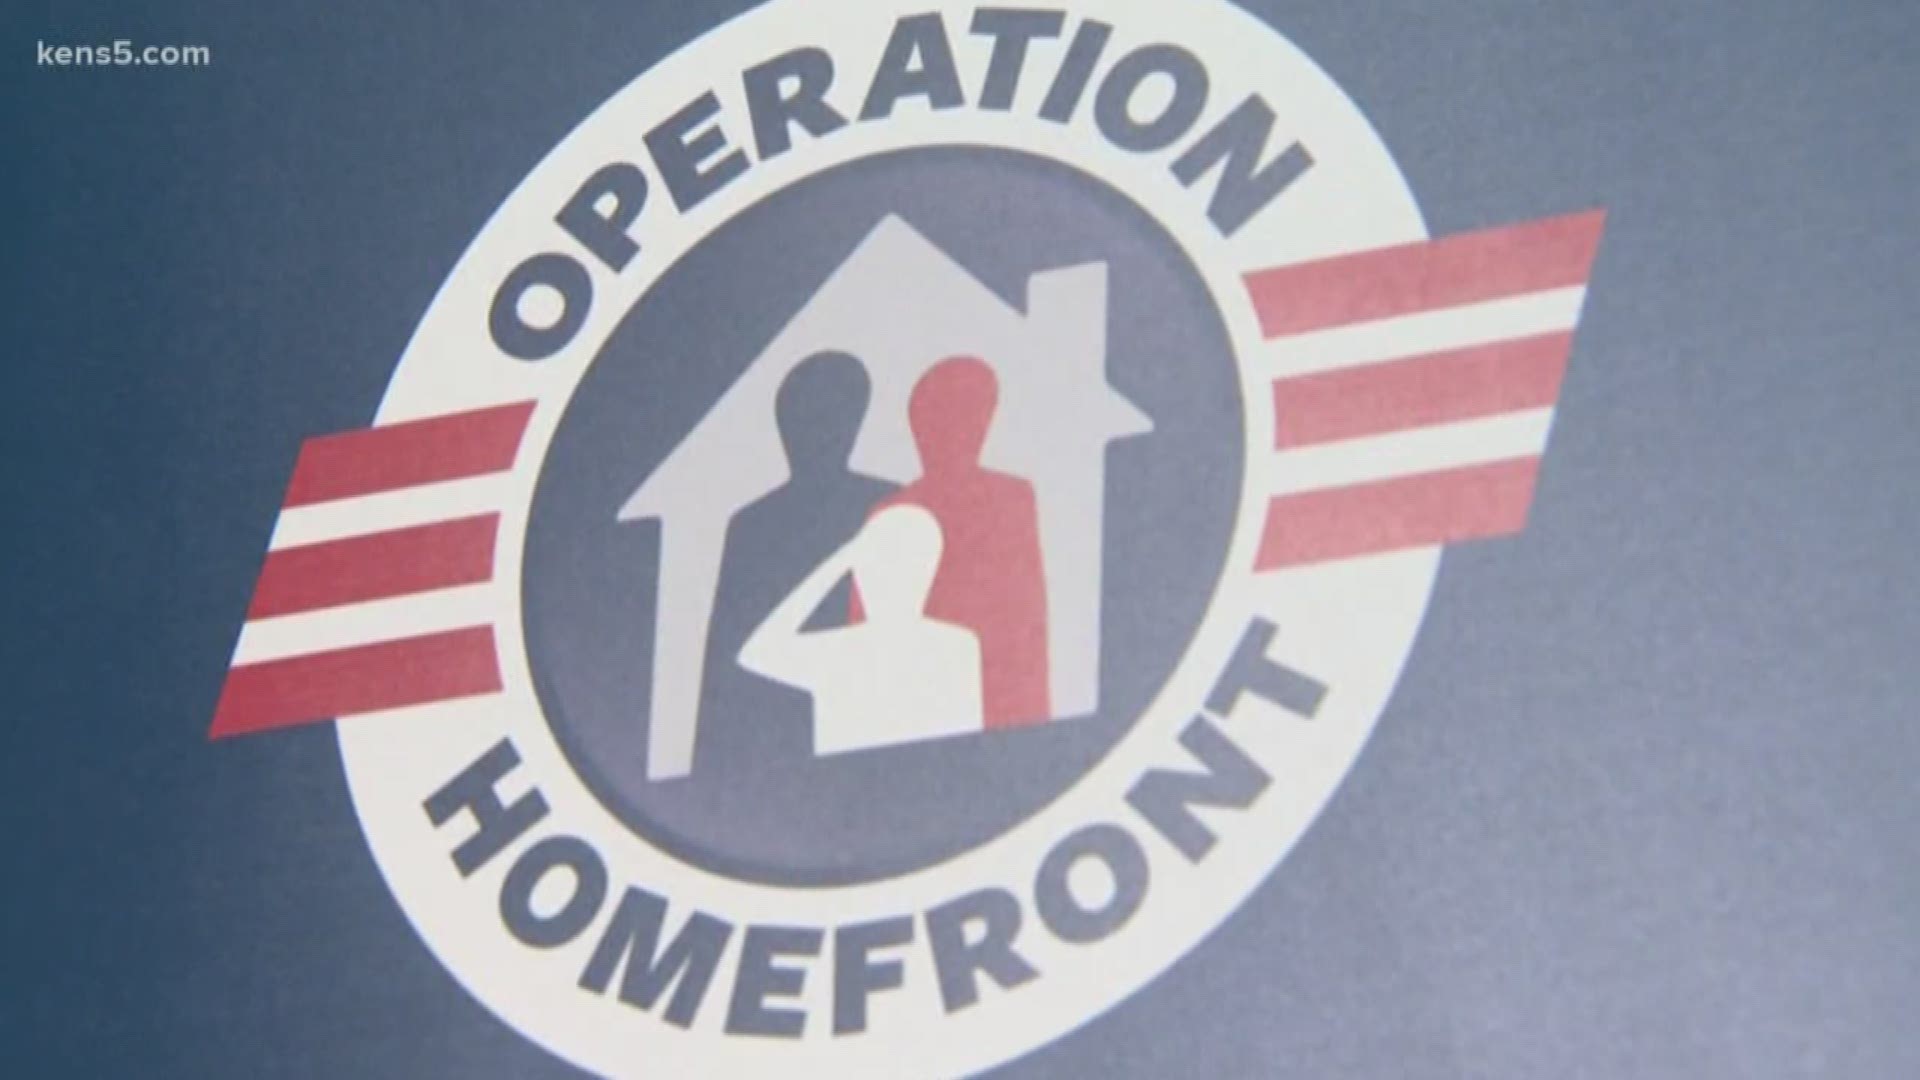 Military members and their families have a new place to call home thanks to Operation Homefront.